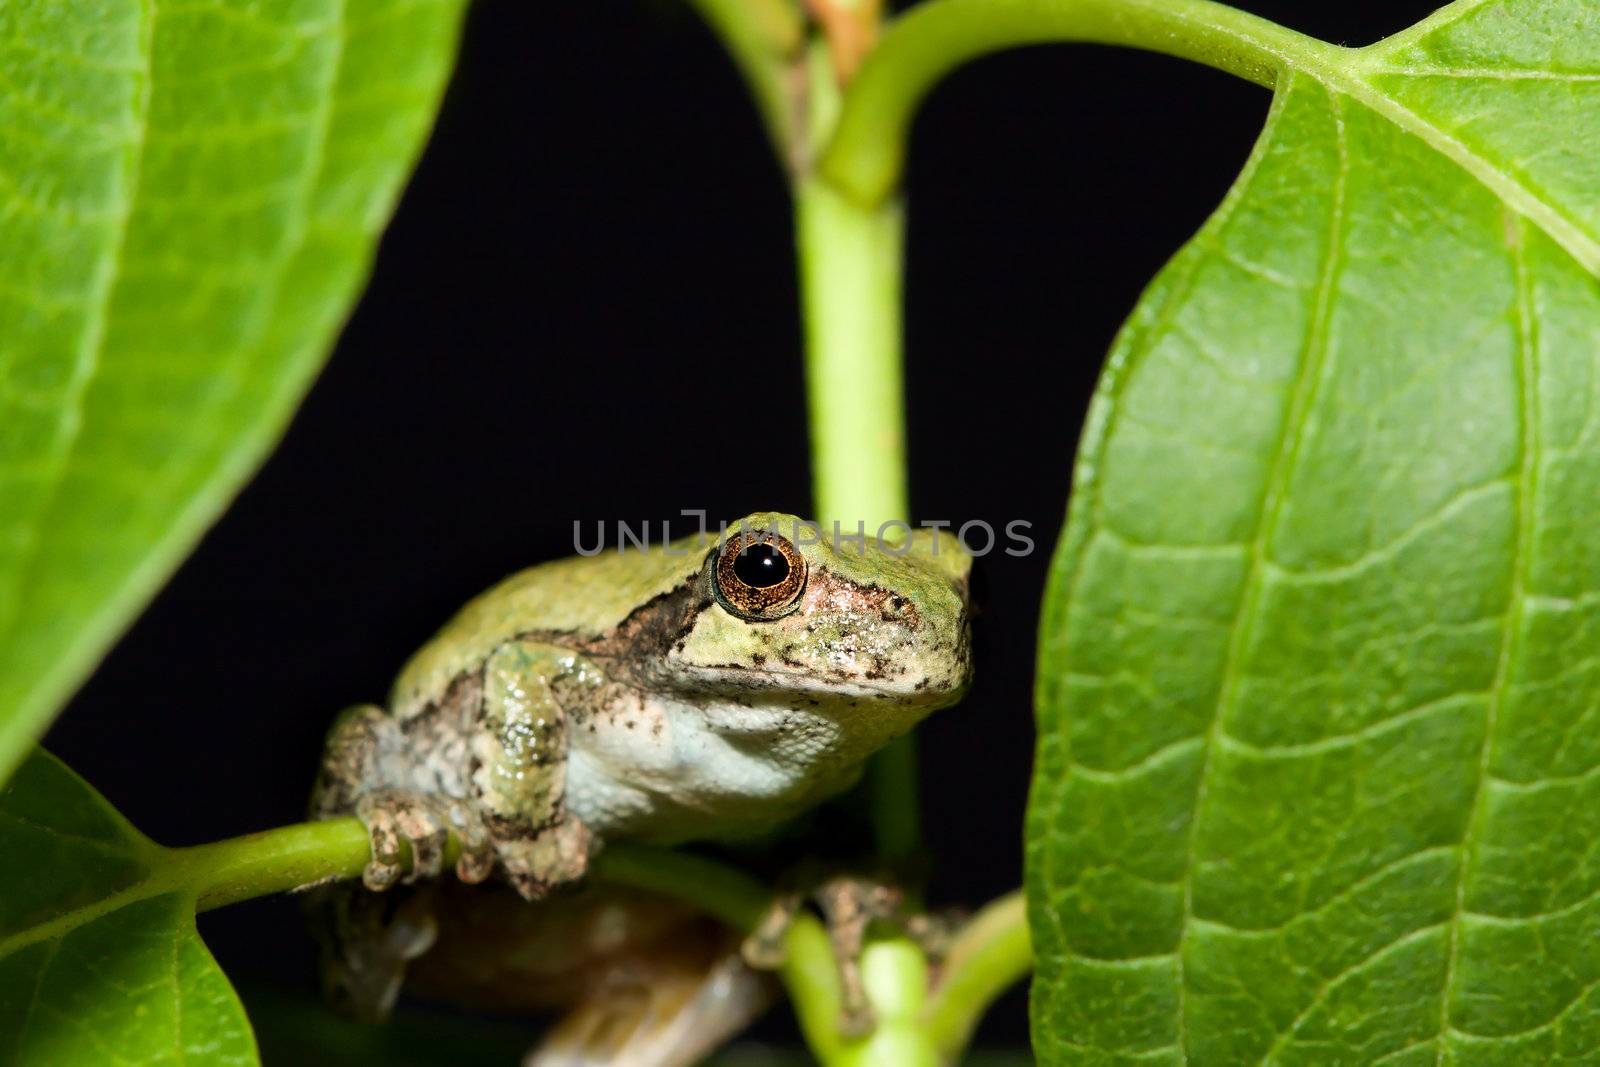 Cope's Gray Tree frog on a leaf.